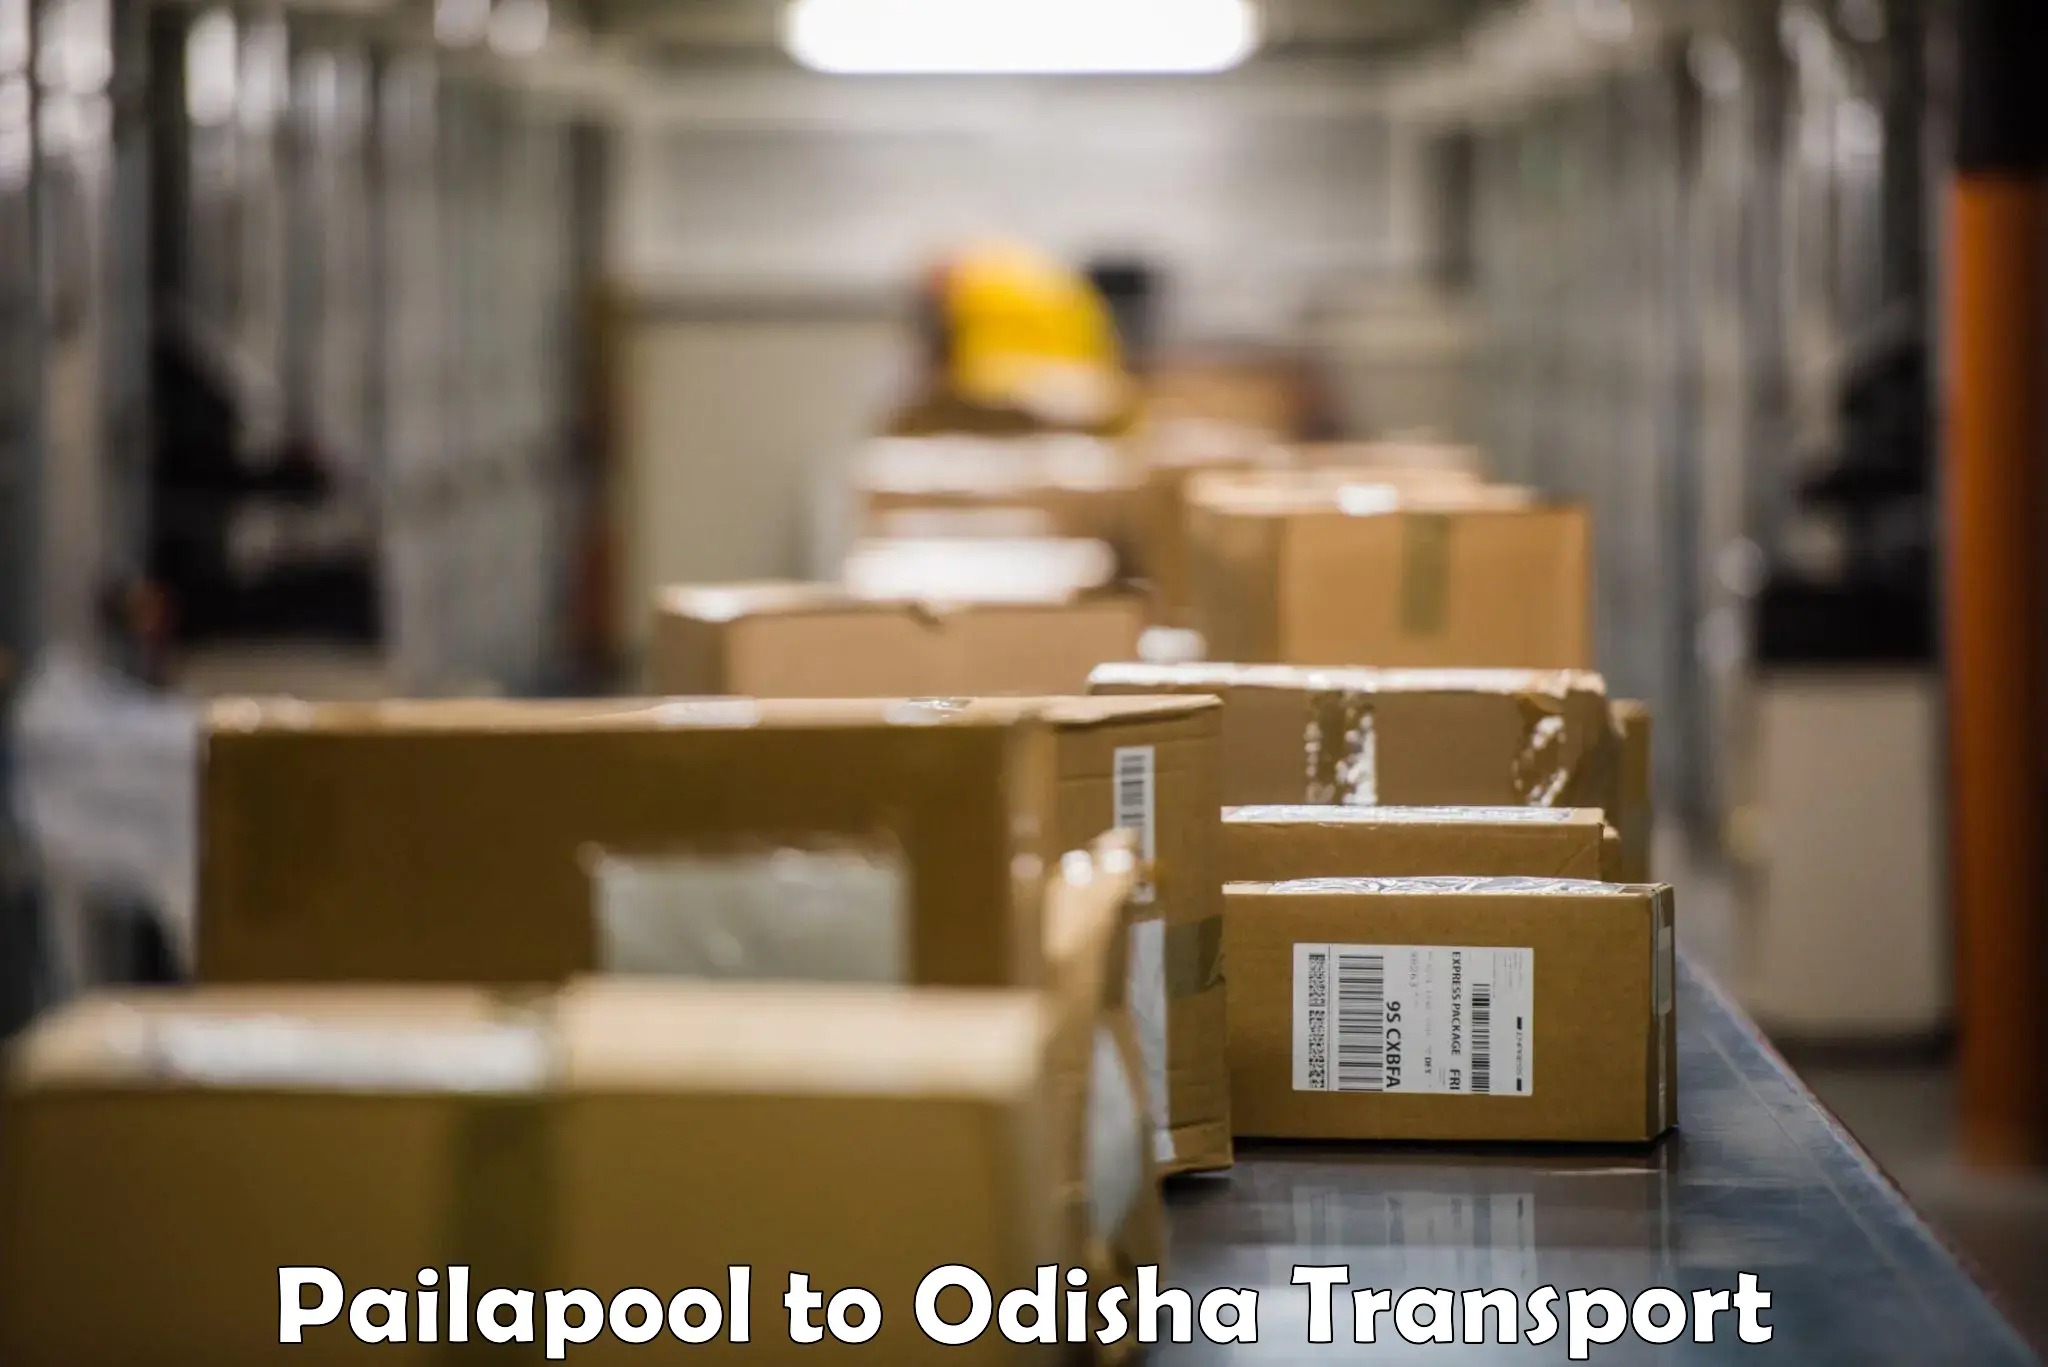 Container transport service Pailapool to Odisha